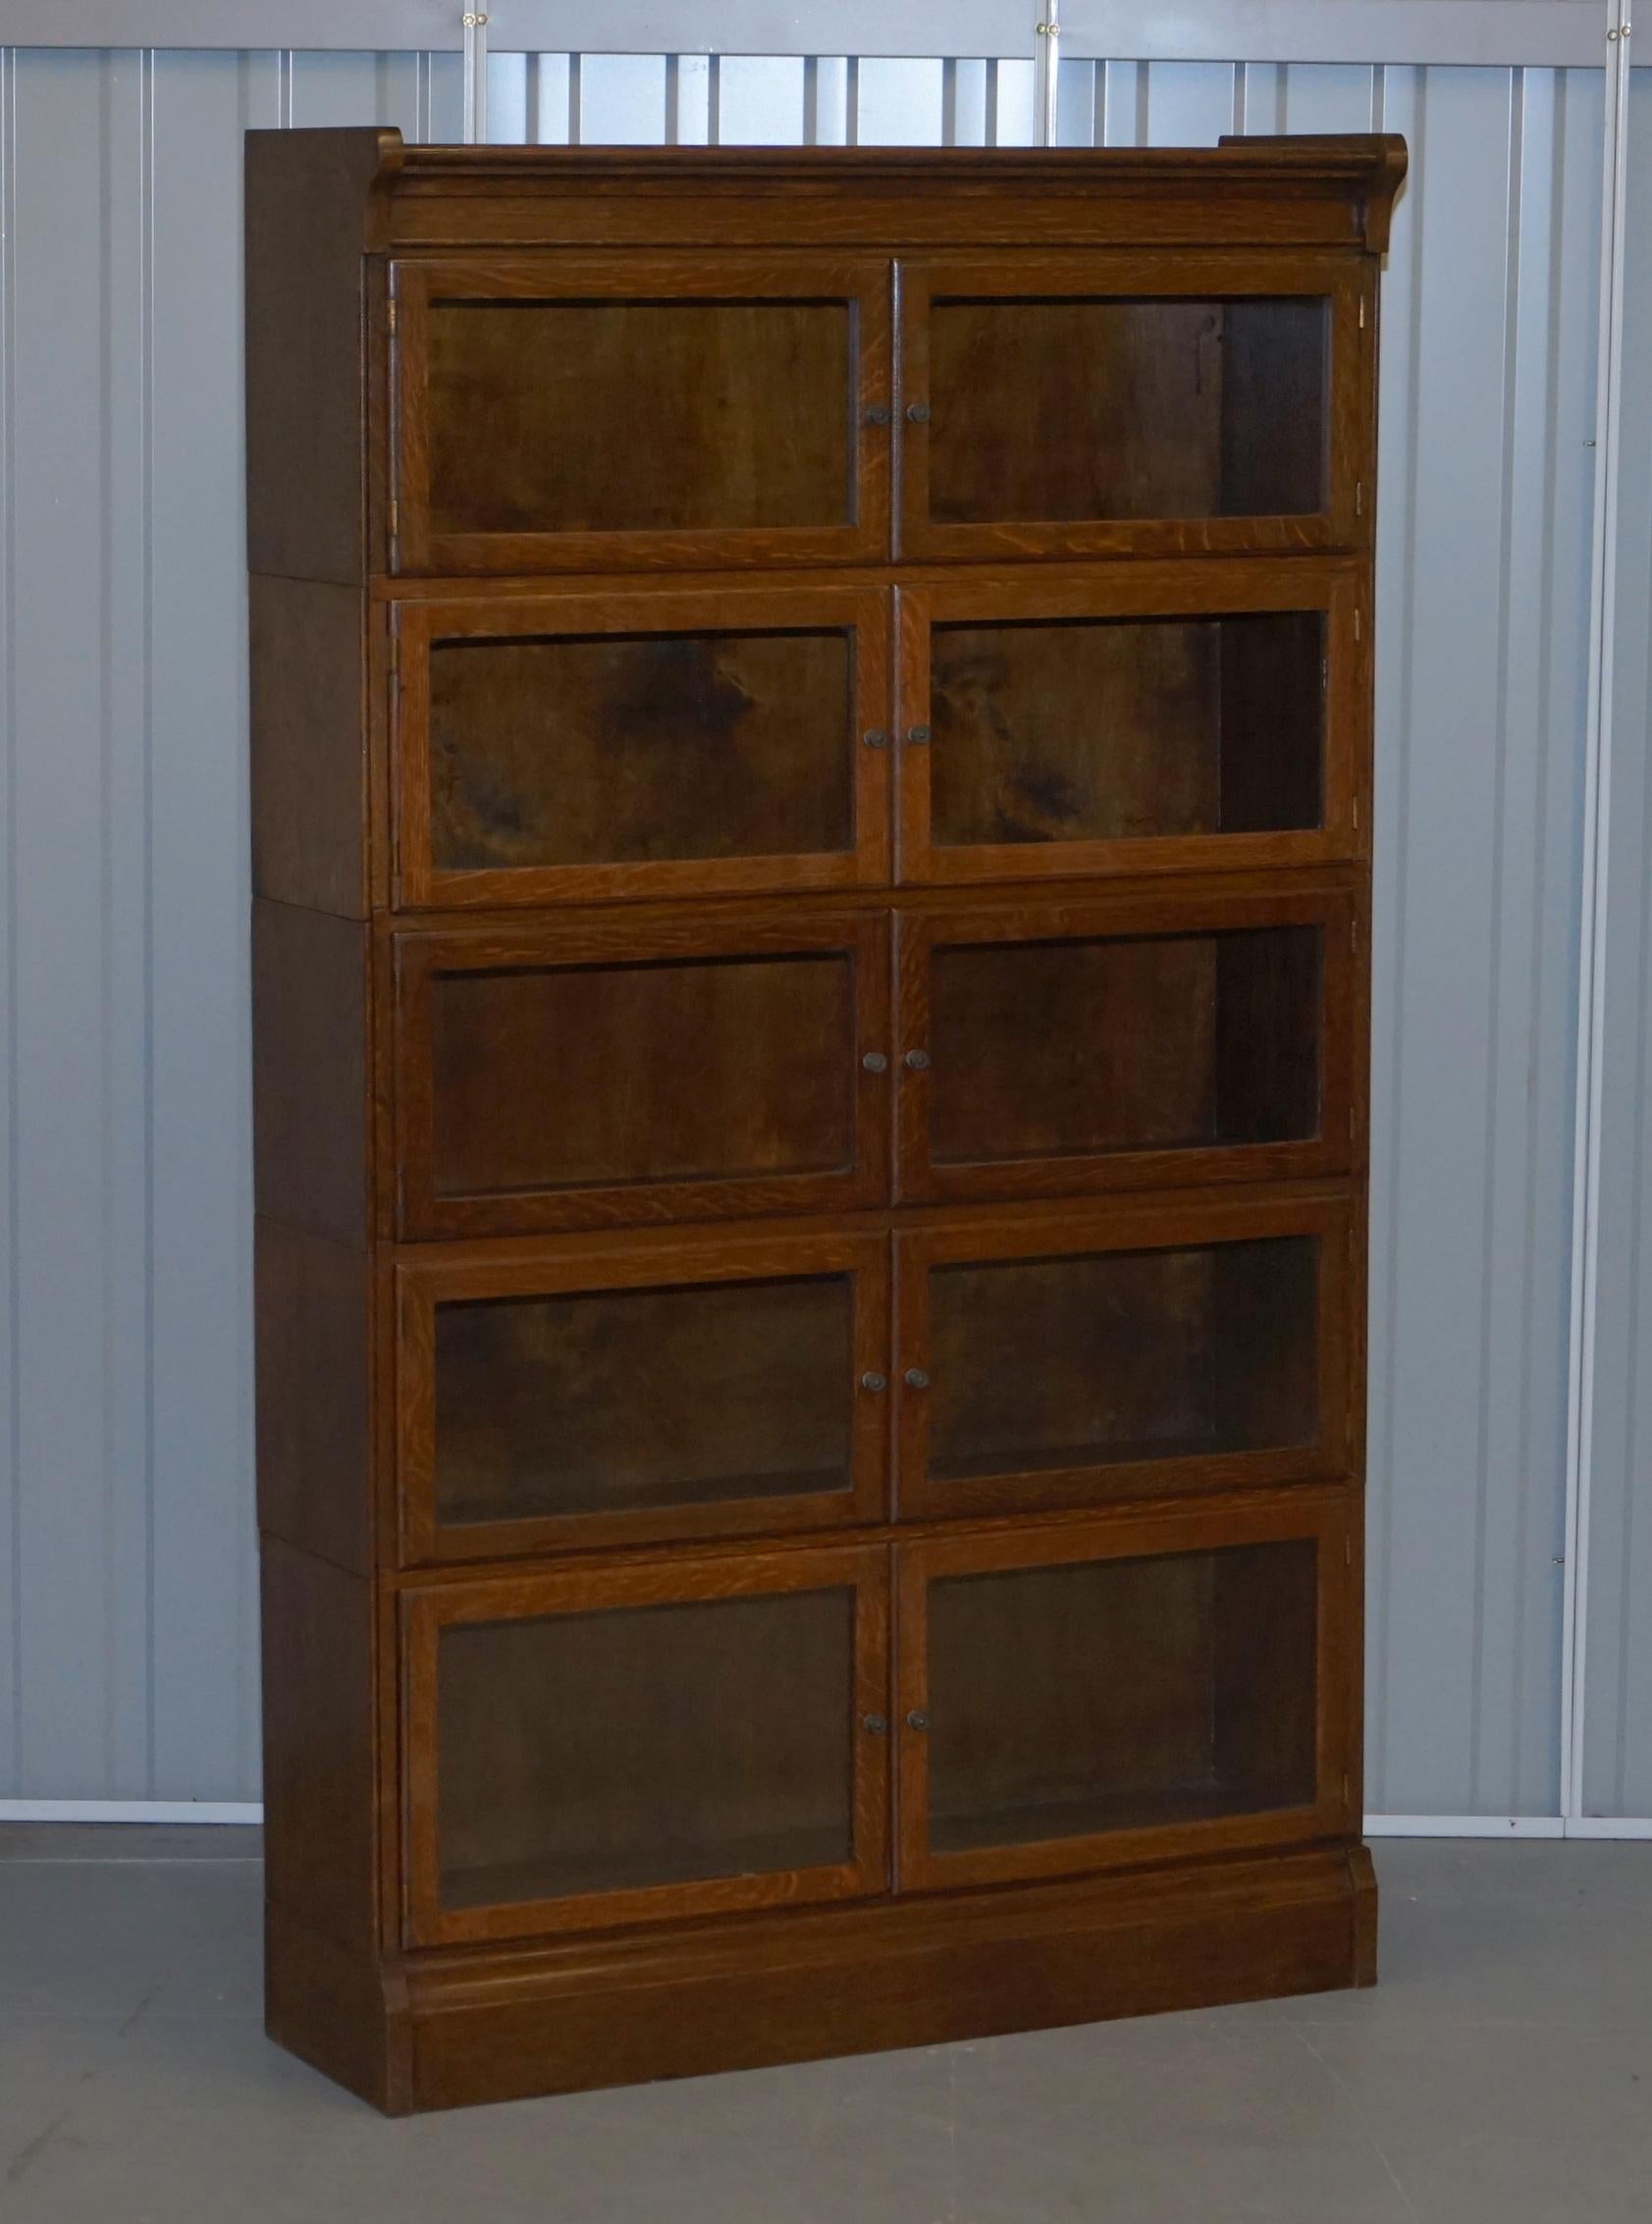 Late Victorian Suite of Four Minty Oxford Legal Library Modualr Adjustable Stacking Bookcases